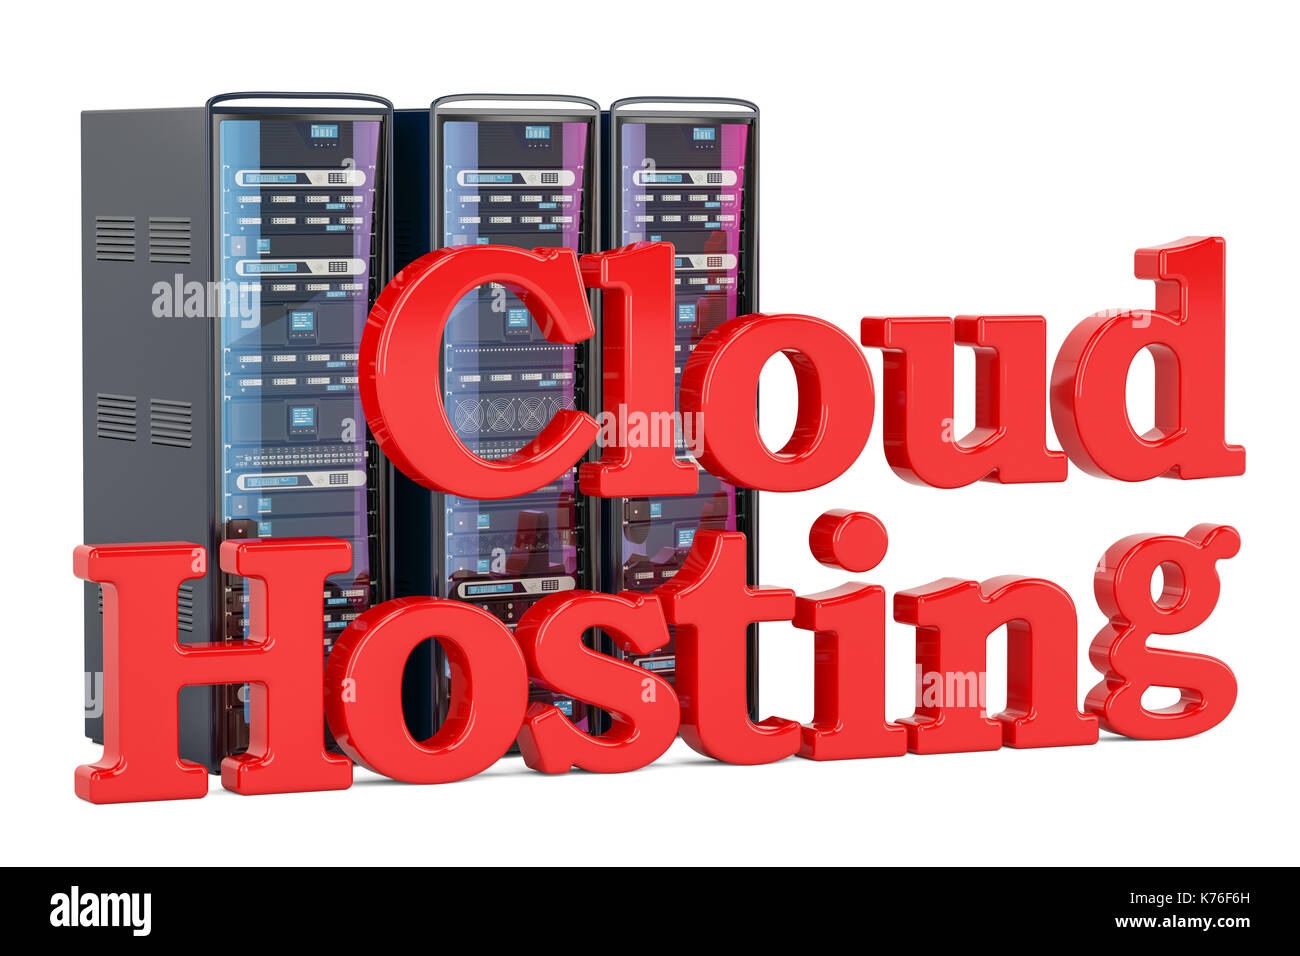 Computer Server Racks, computer cloud hosting concept. 3D rendering isolated on white background Stock Photo